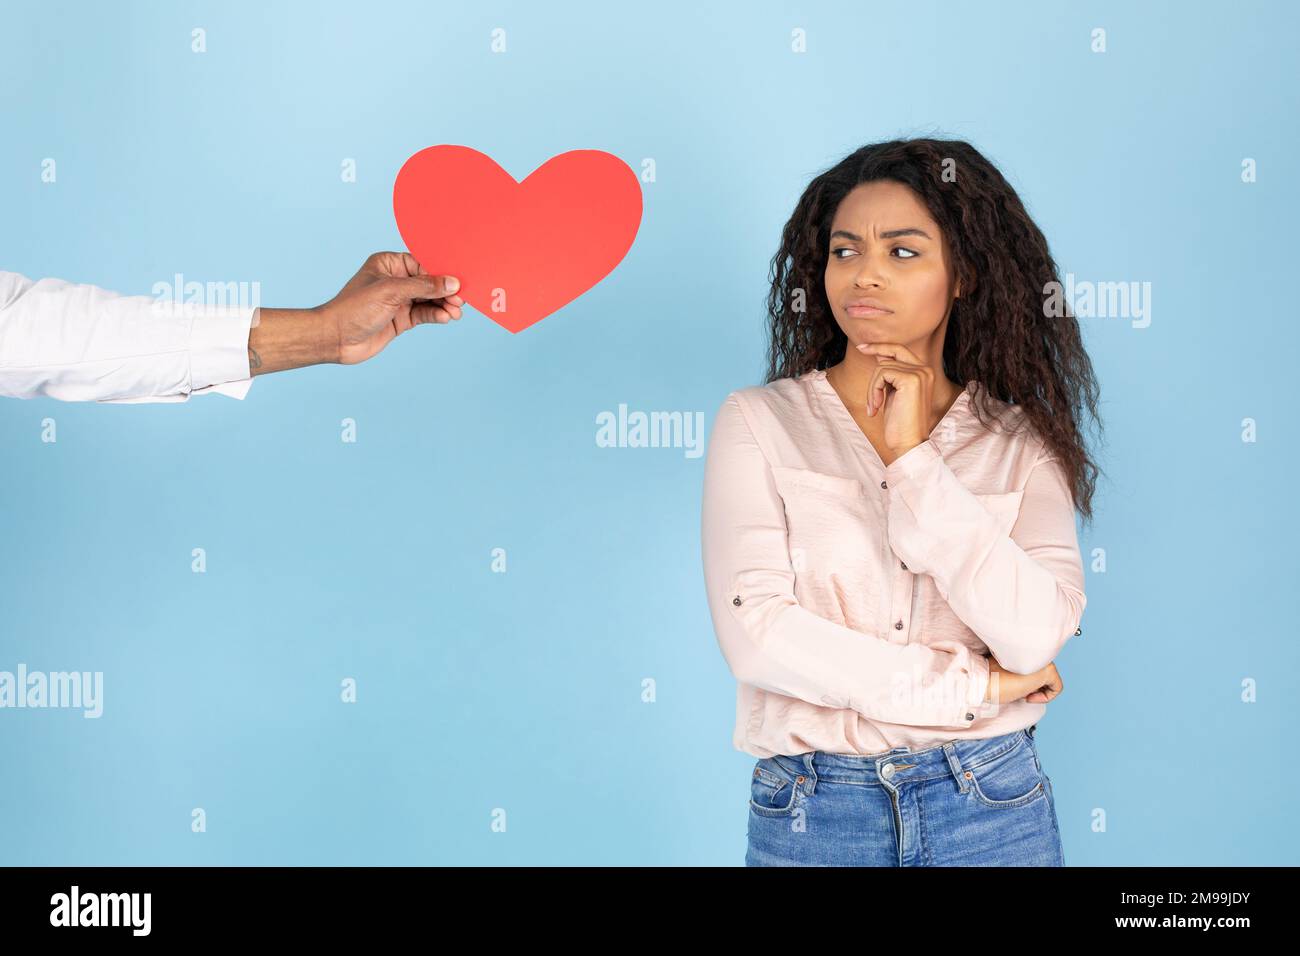 Yes or no. Man giving paper red heart to young woman, lady thinking about date invitation answer, blue studio background Stock Photo